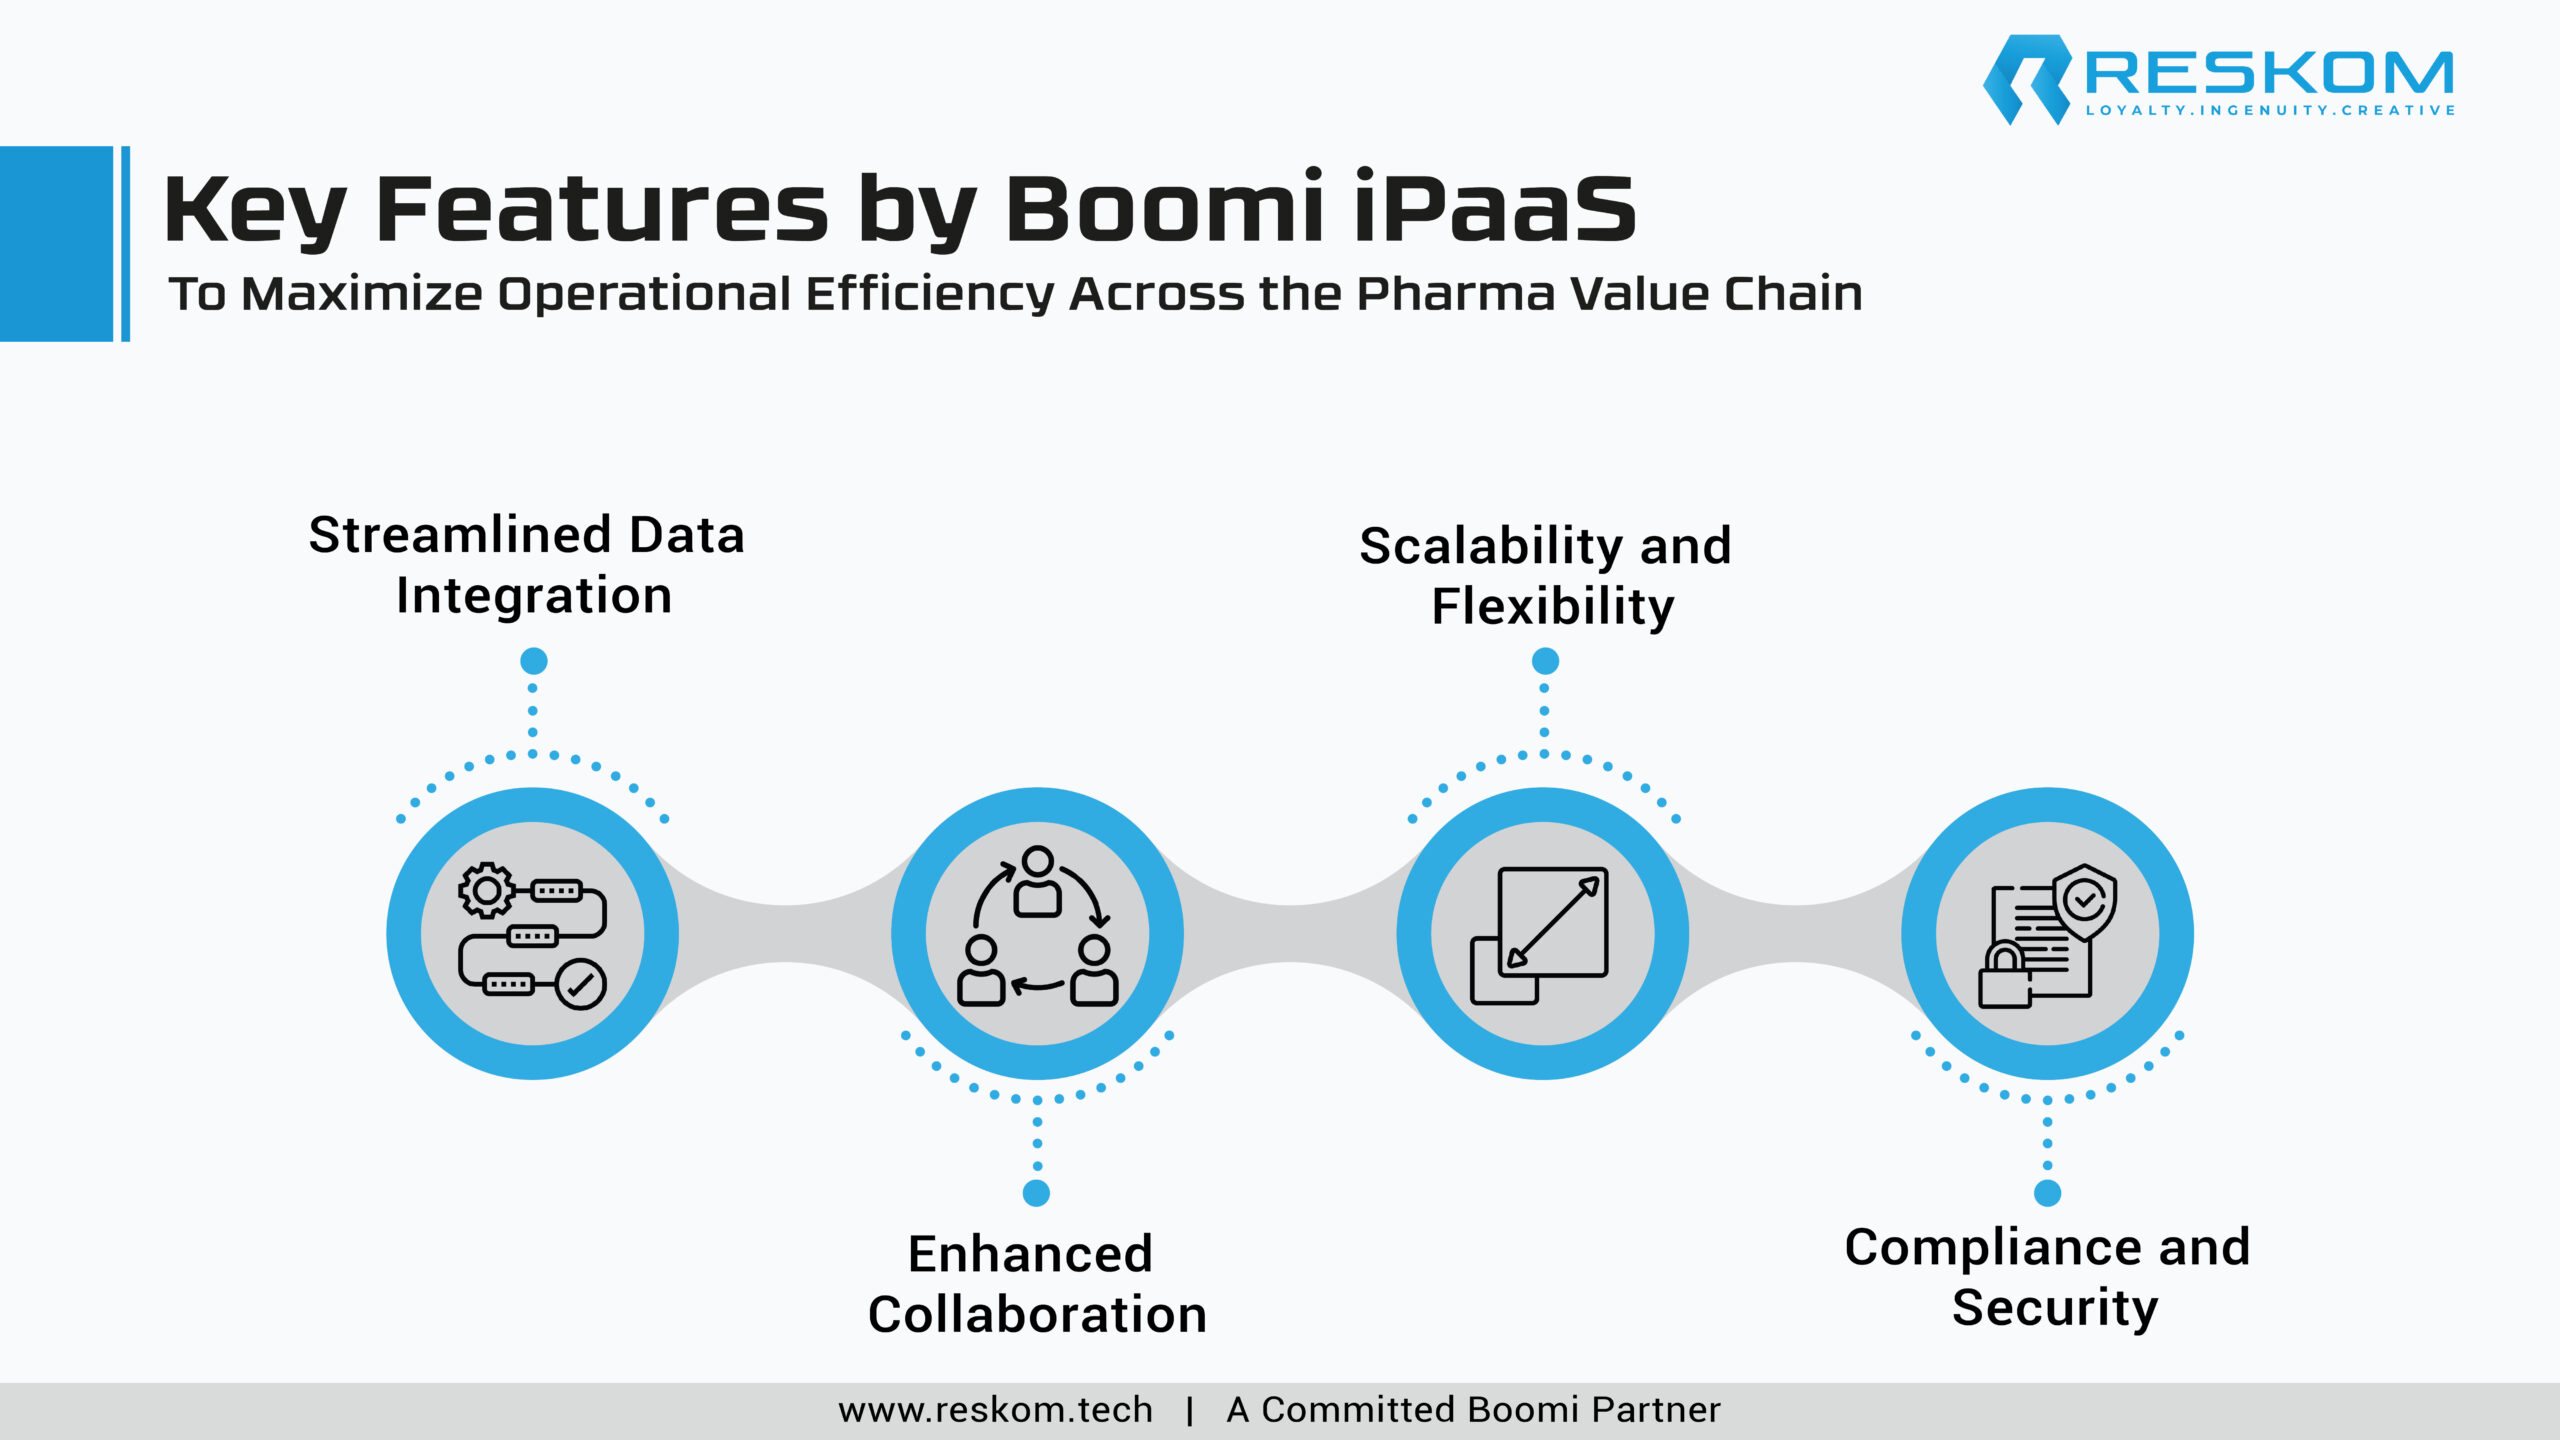 Key Features by Boomi iPaaS to Maximize Operational Efficiency Across the Pharma Value Chain-01-01-01